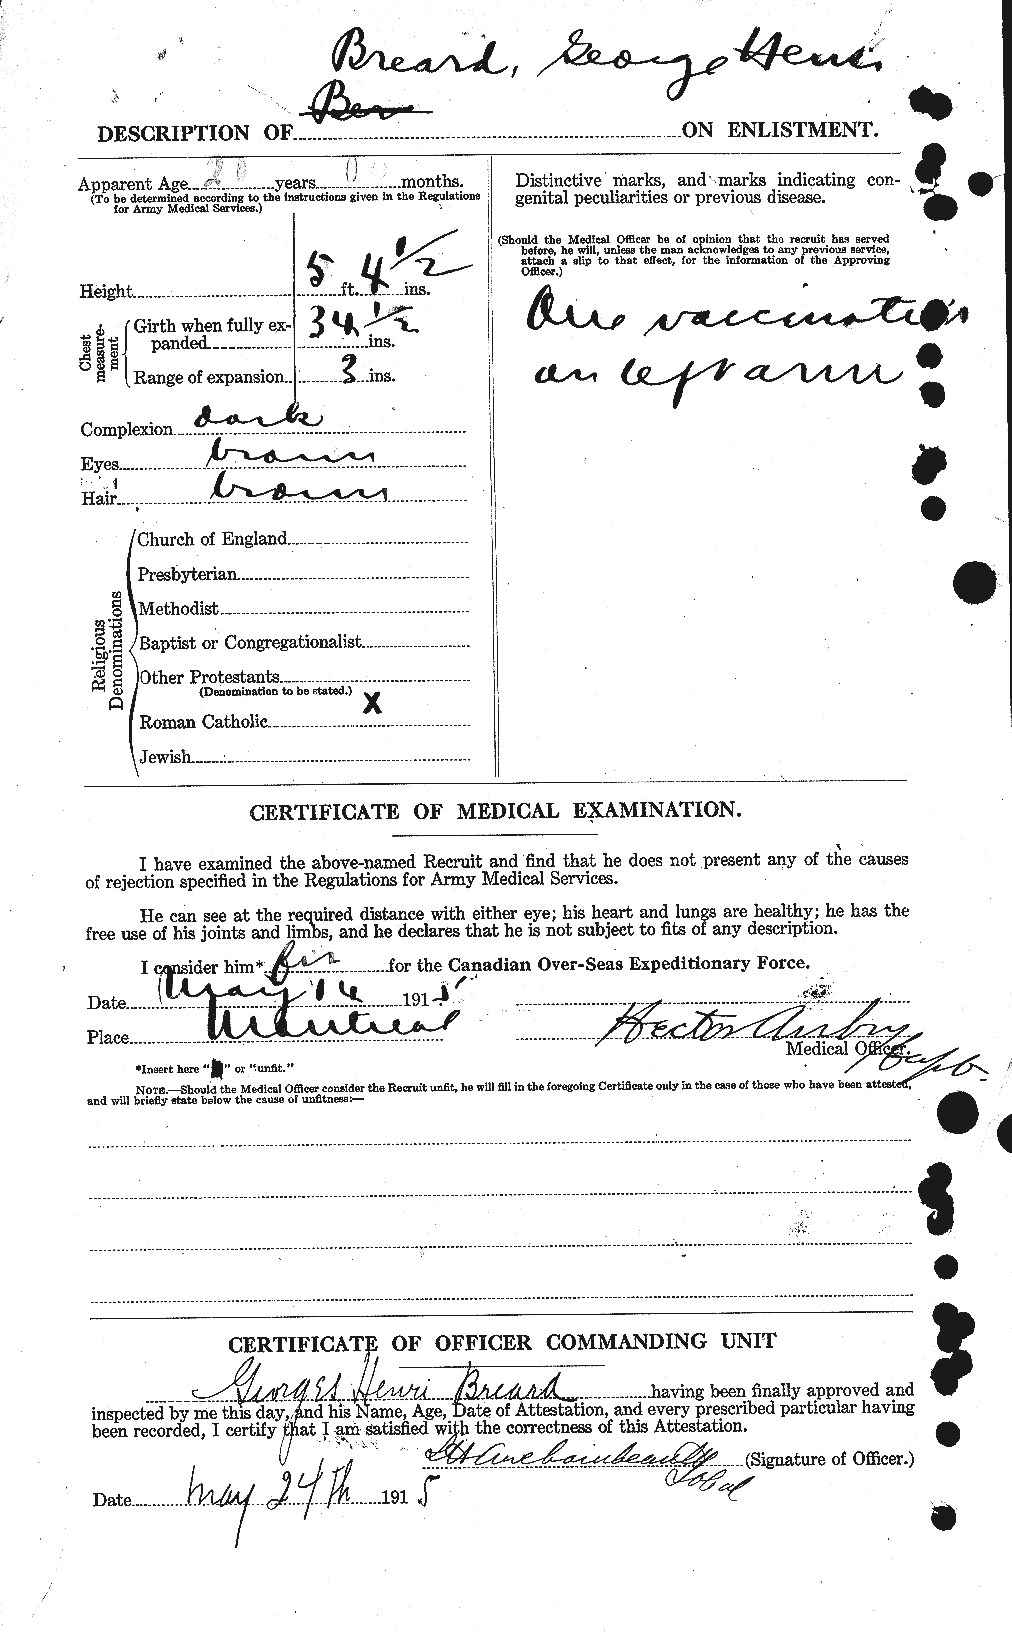 Personnel Records of the First World War - CEF 262760b